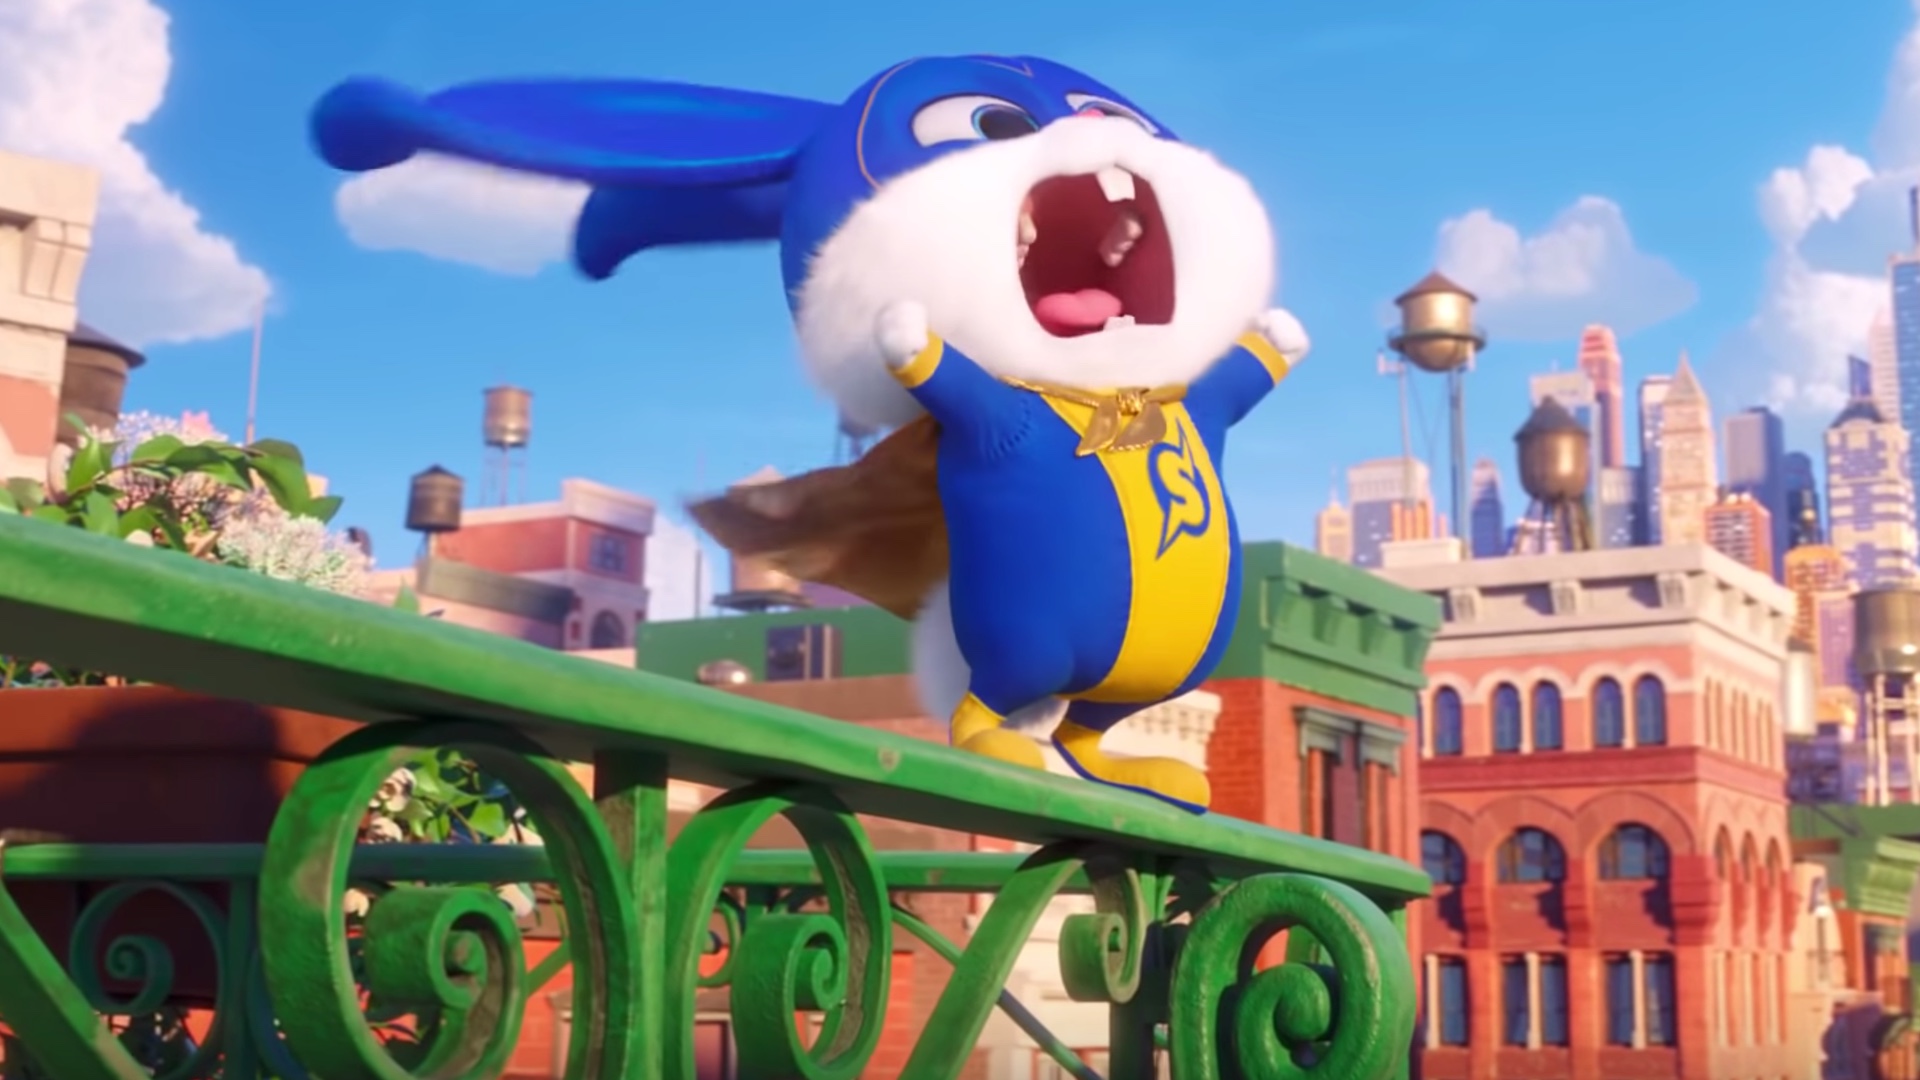 The Snowball Trailer Has Been Released For THE SECRET LIFE OF PETS 2 —  GeekTyrant